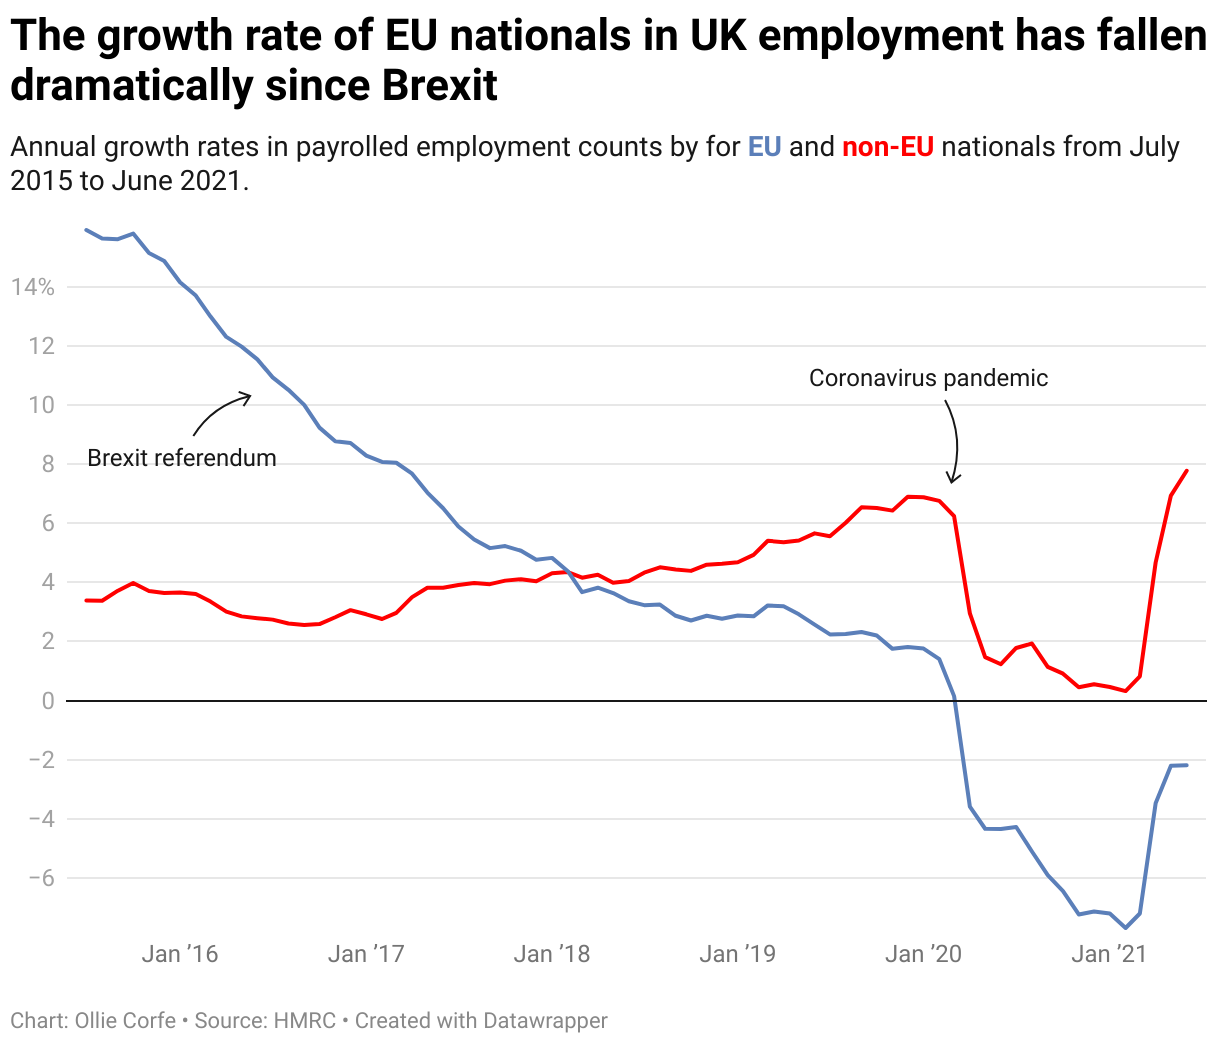 Line chart displaying the growth rate of Eu and non-Eu nationals in the UK workforce from July 2015 to June 2014.